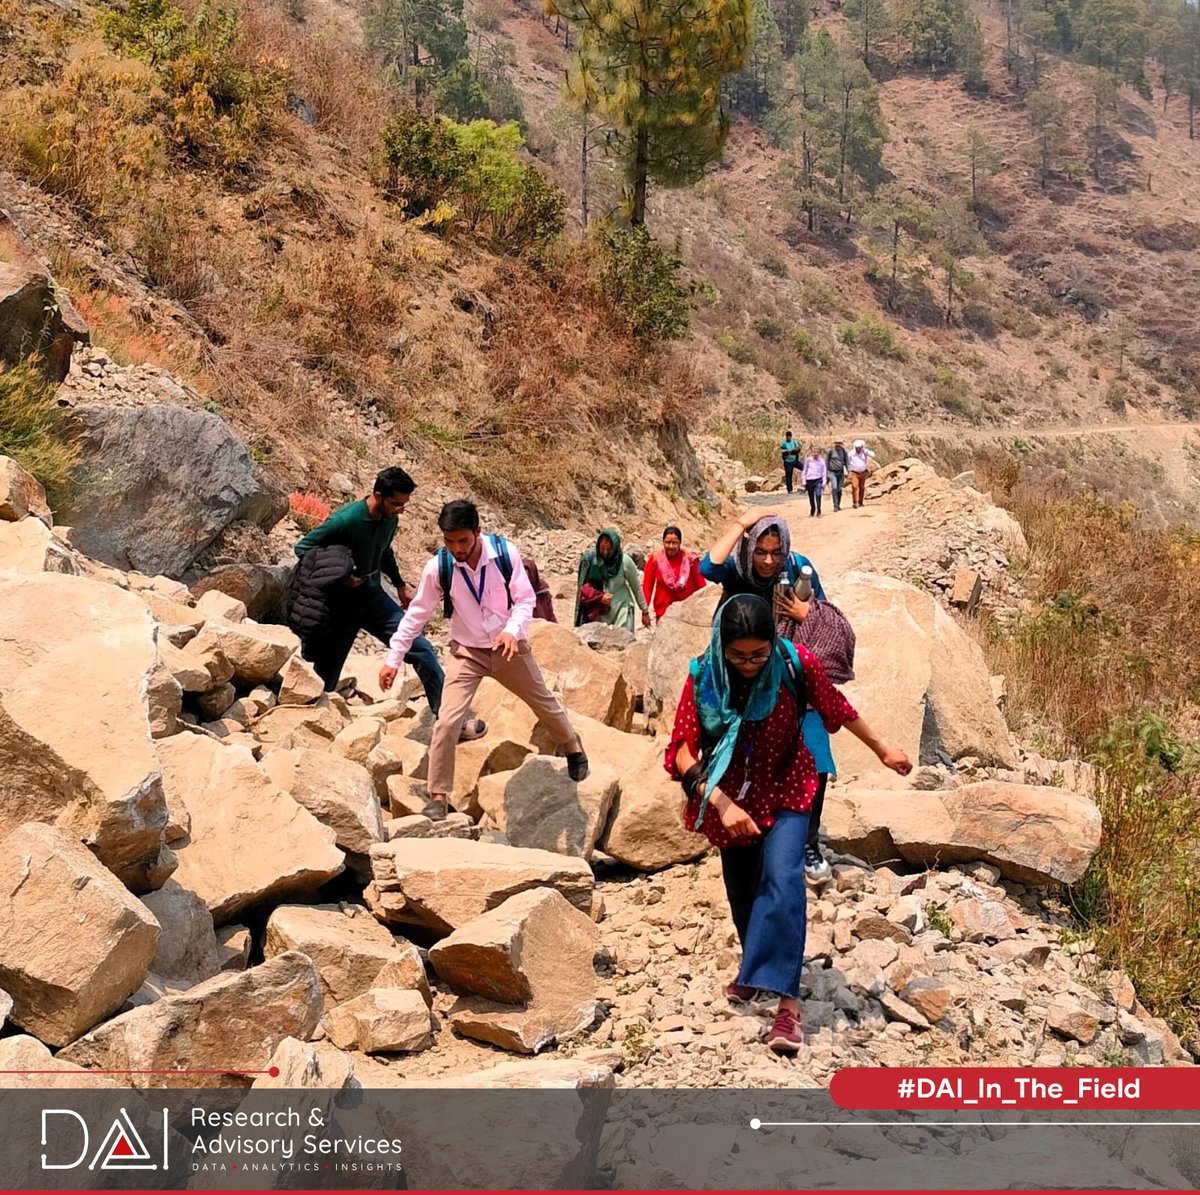 🌄 #DAI_In_The_Field

Team DAI #Surveyors, finding paths taken by locals everyday. They remain our primary motivators and inspiration, showing us that obstacles in the way of #SocialImpact, can be cleared even if some are more arduous than others.

#DataAnalytics #Uttarakhand